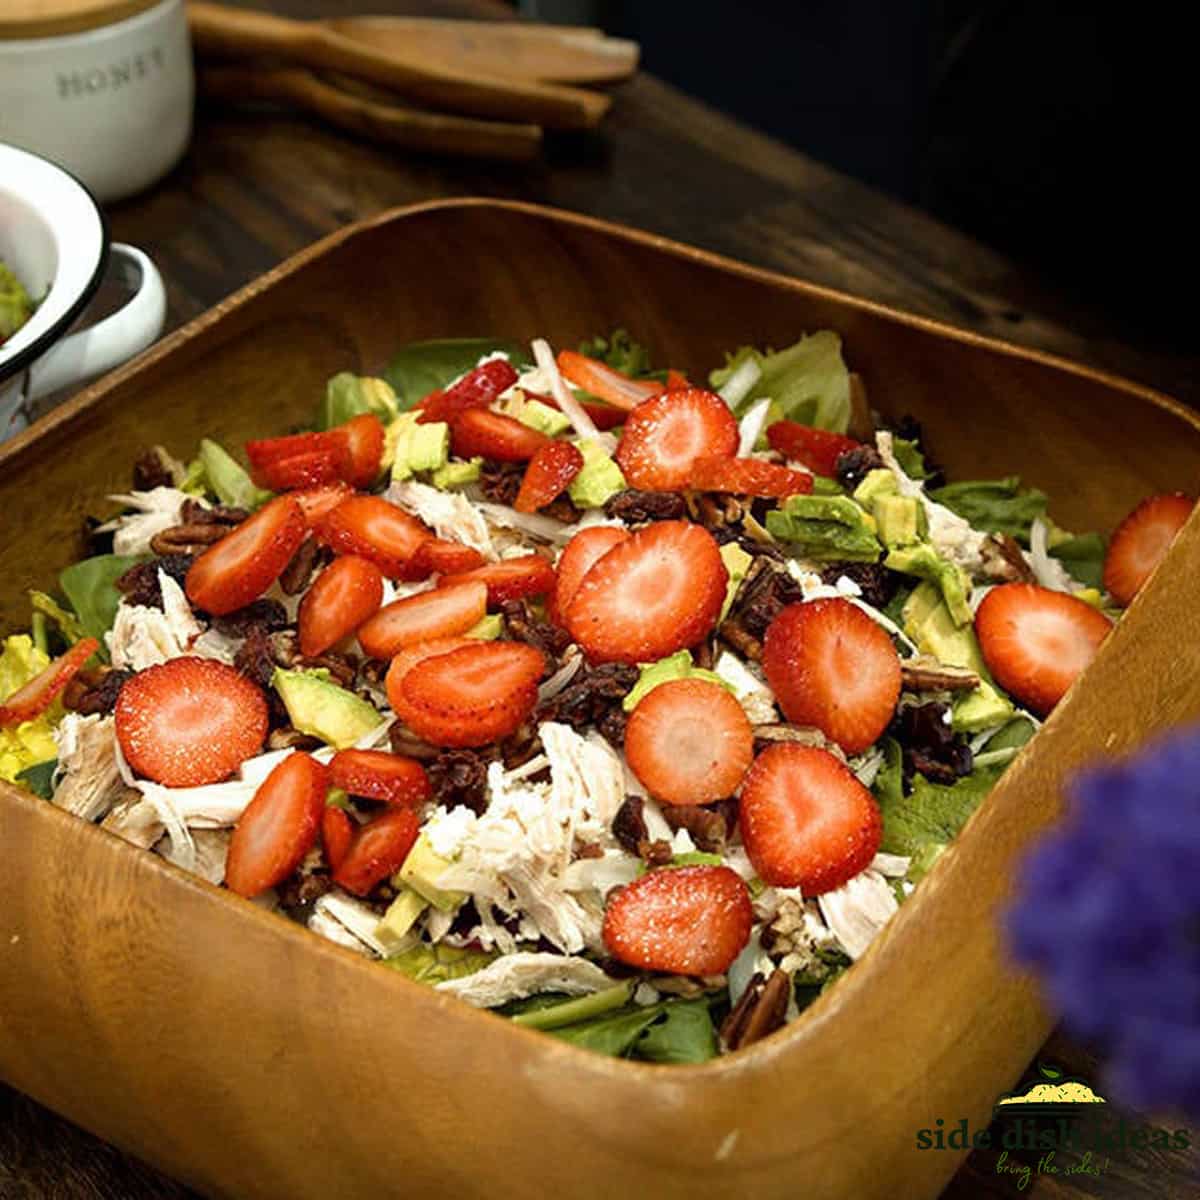 strawberry salad in a wooden bowl with chicken and nuts